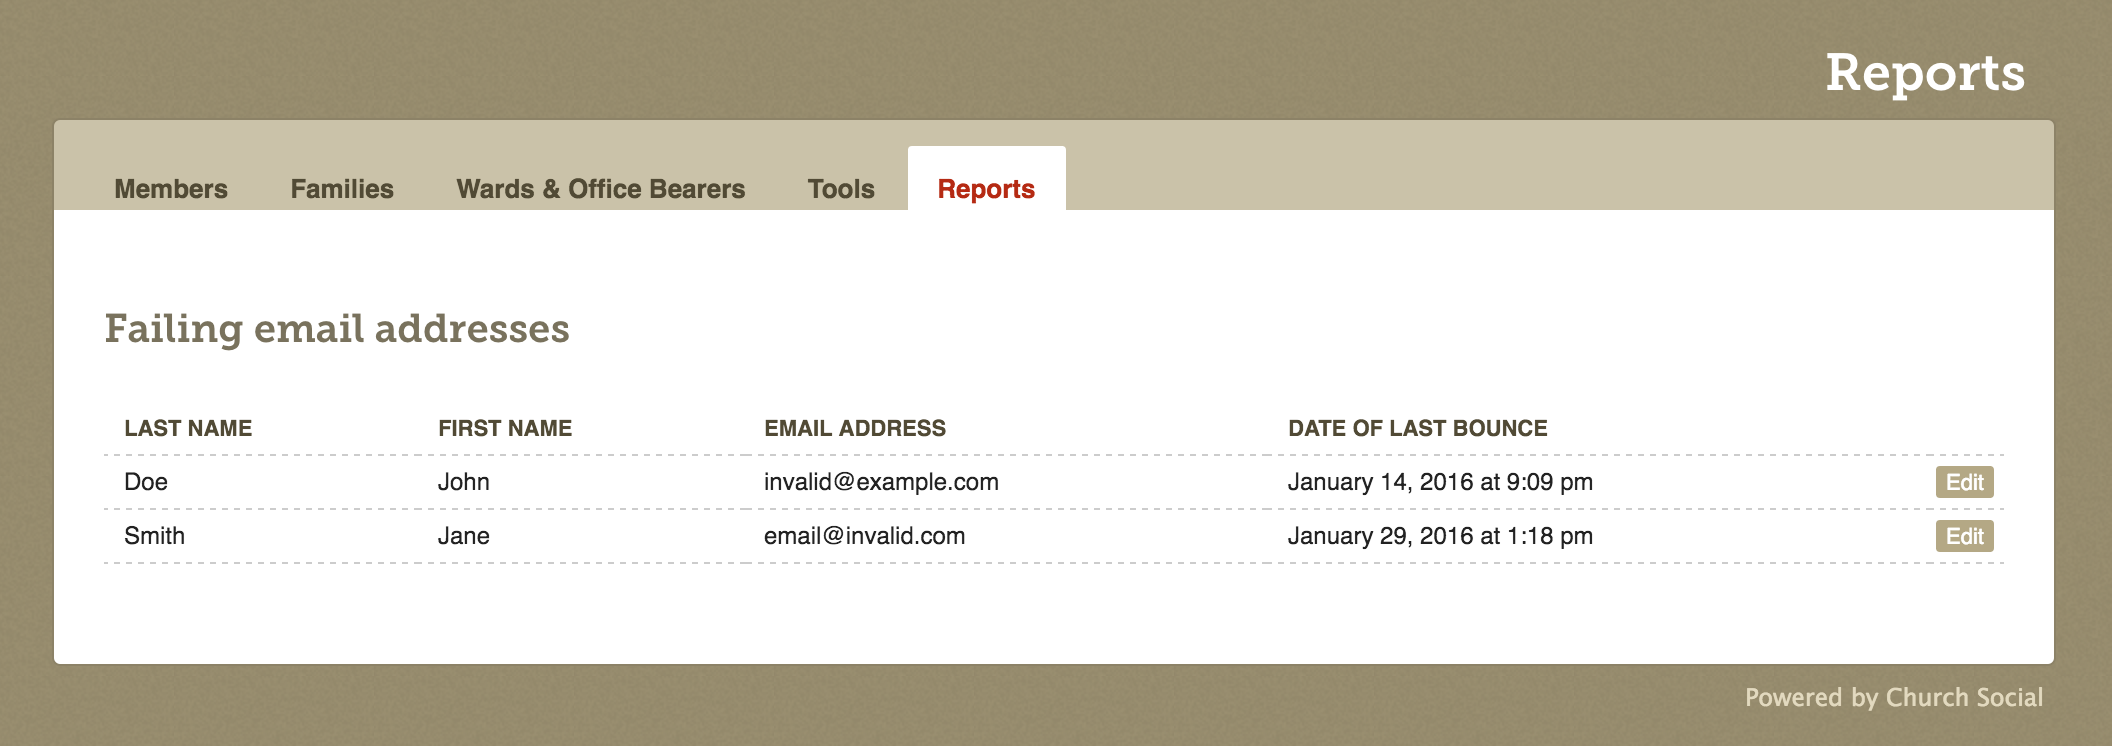 Screenshot of the failing email addresses report